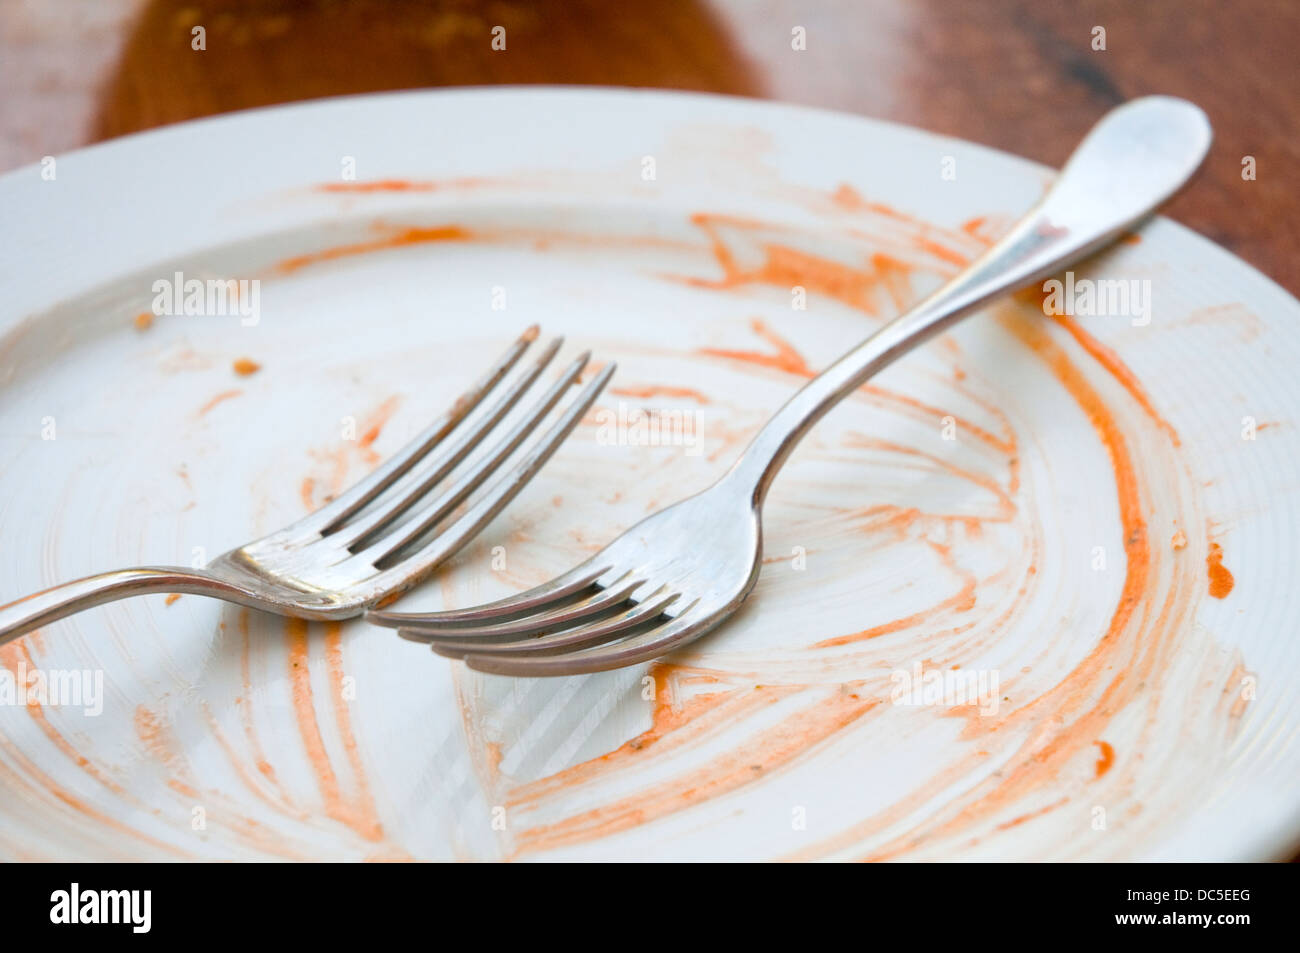 Two forks on an empty plate after eating. Stock Photo